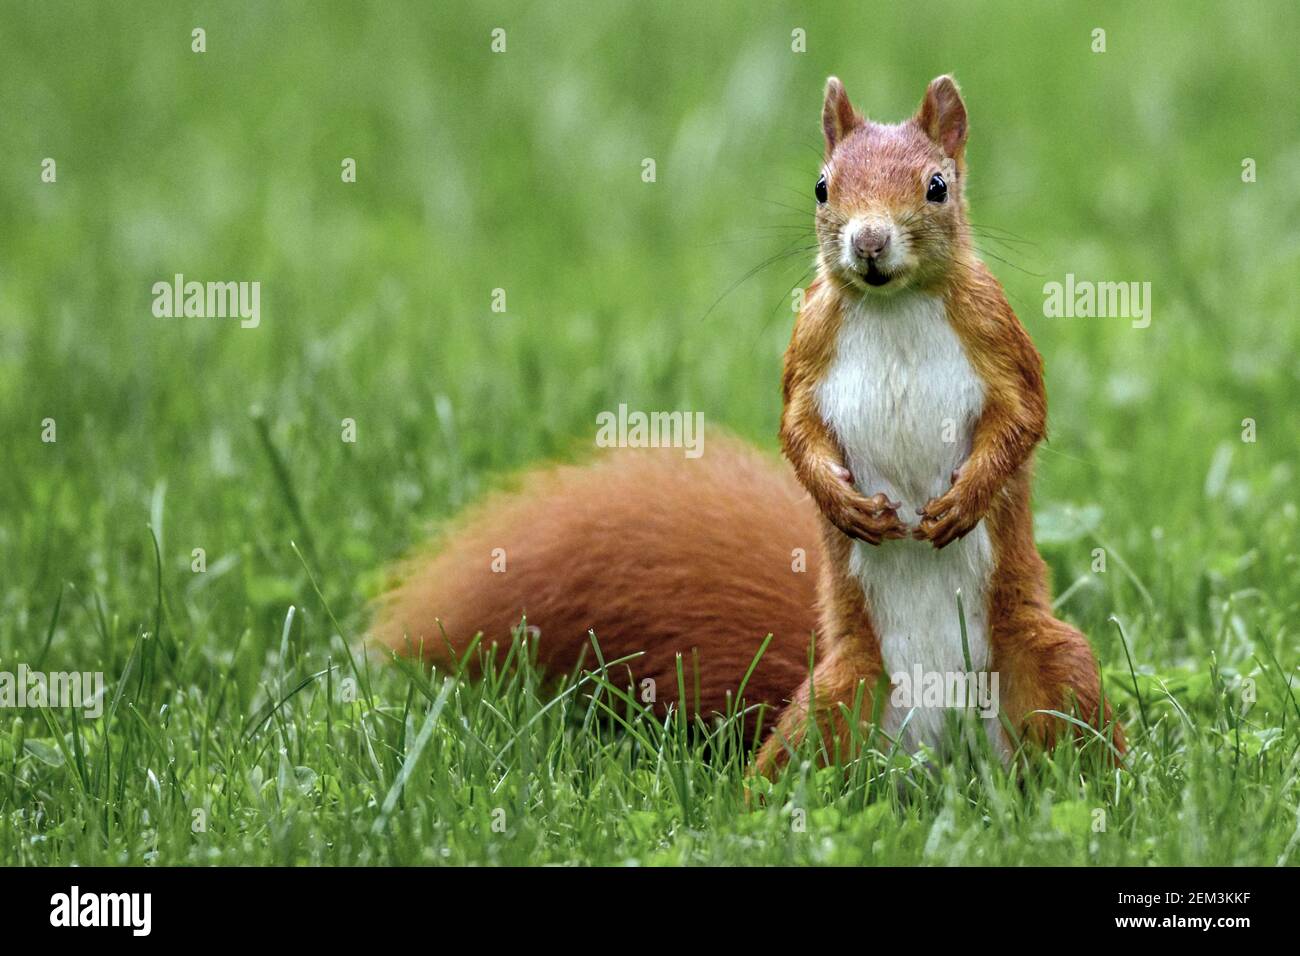 European red squirrel, Eurasian red squirrel (Sciurus vulgaris), sitting erect in a meadow, front view, Germany, Baden-Wuerttemberg Stock Photo